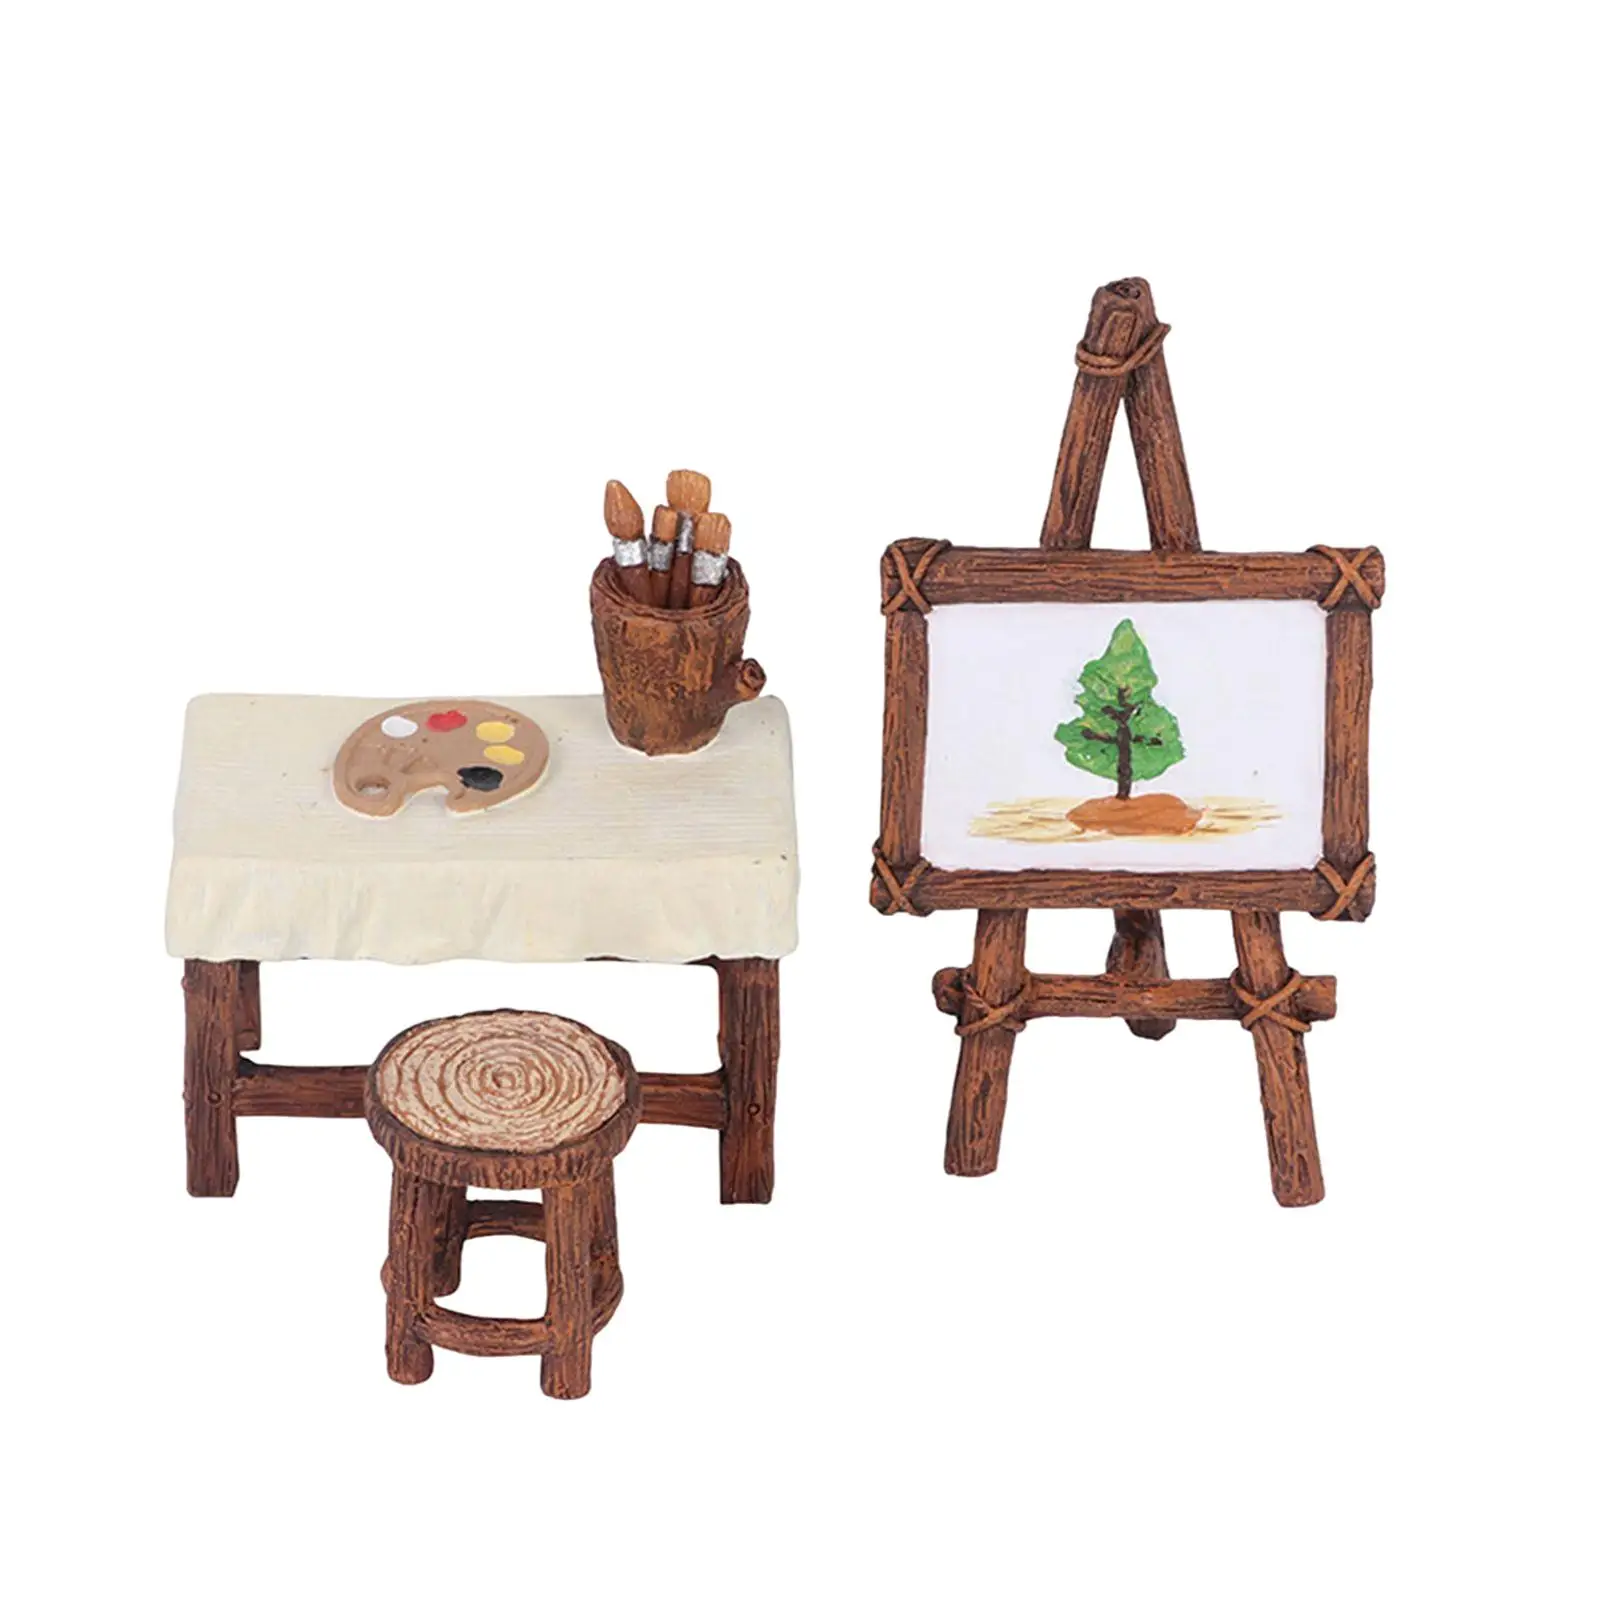 Painting Scene Model Adults Childrens 1/12 Miniature Dollhouse Accessories